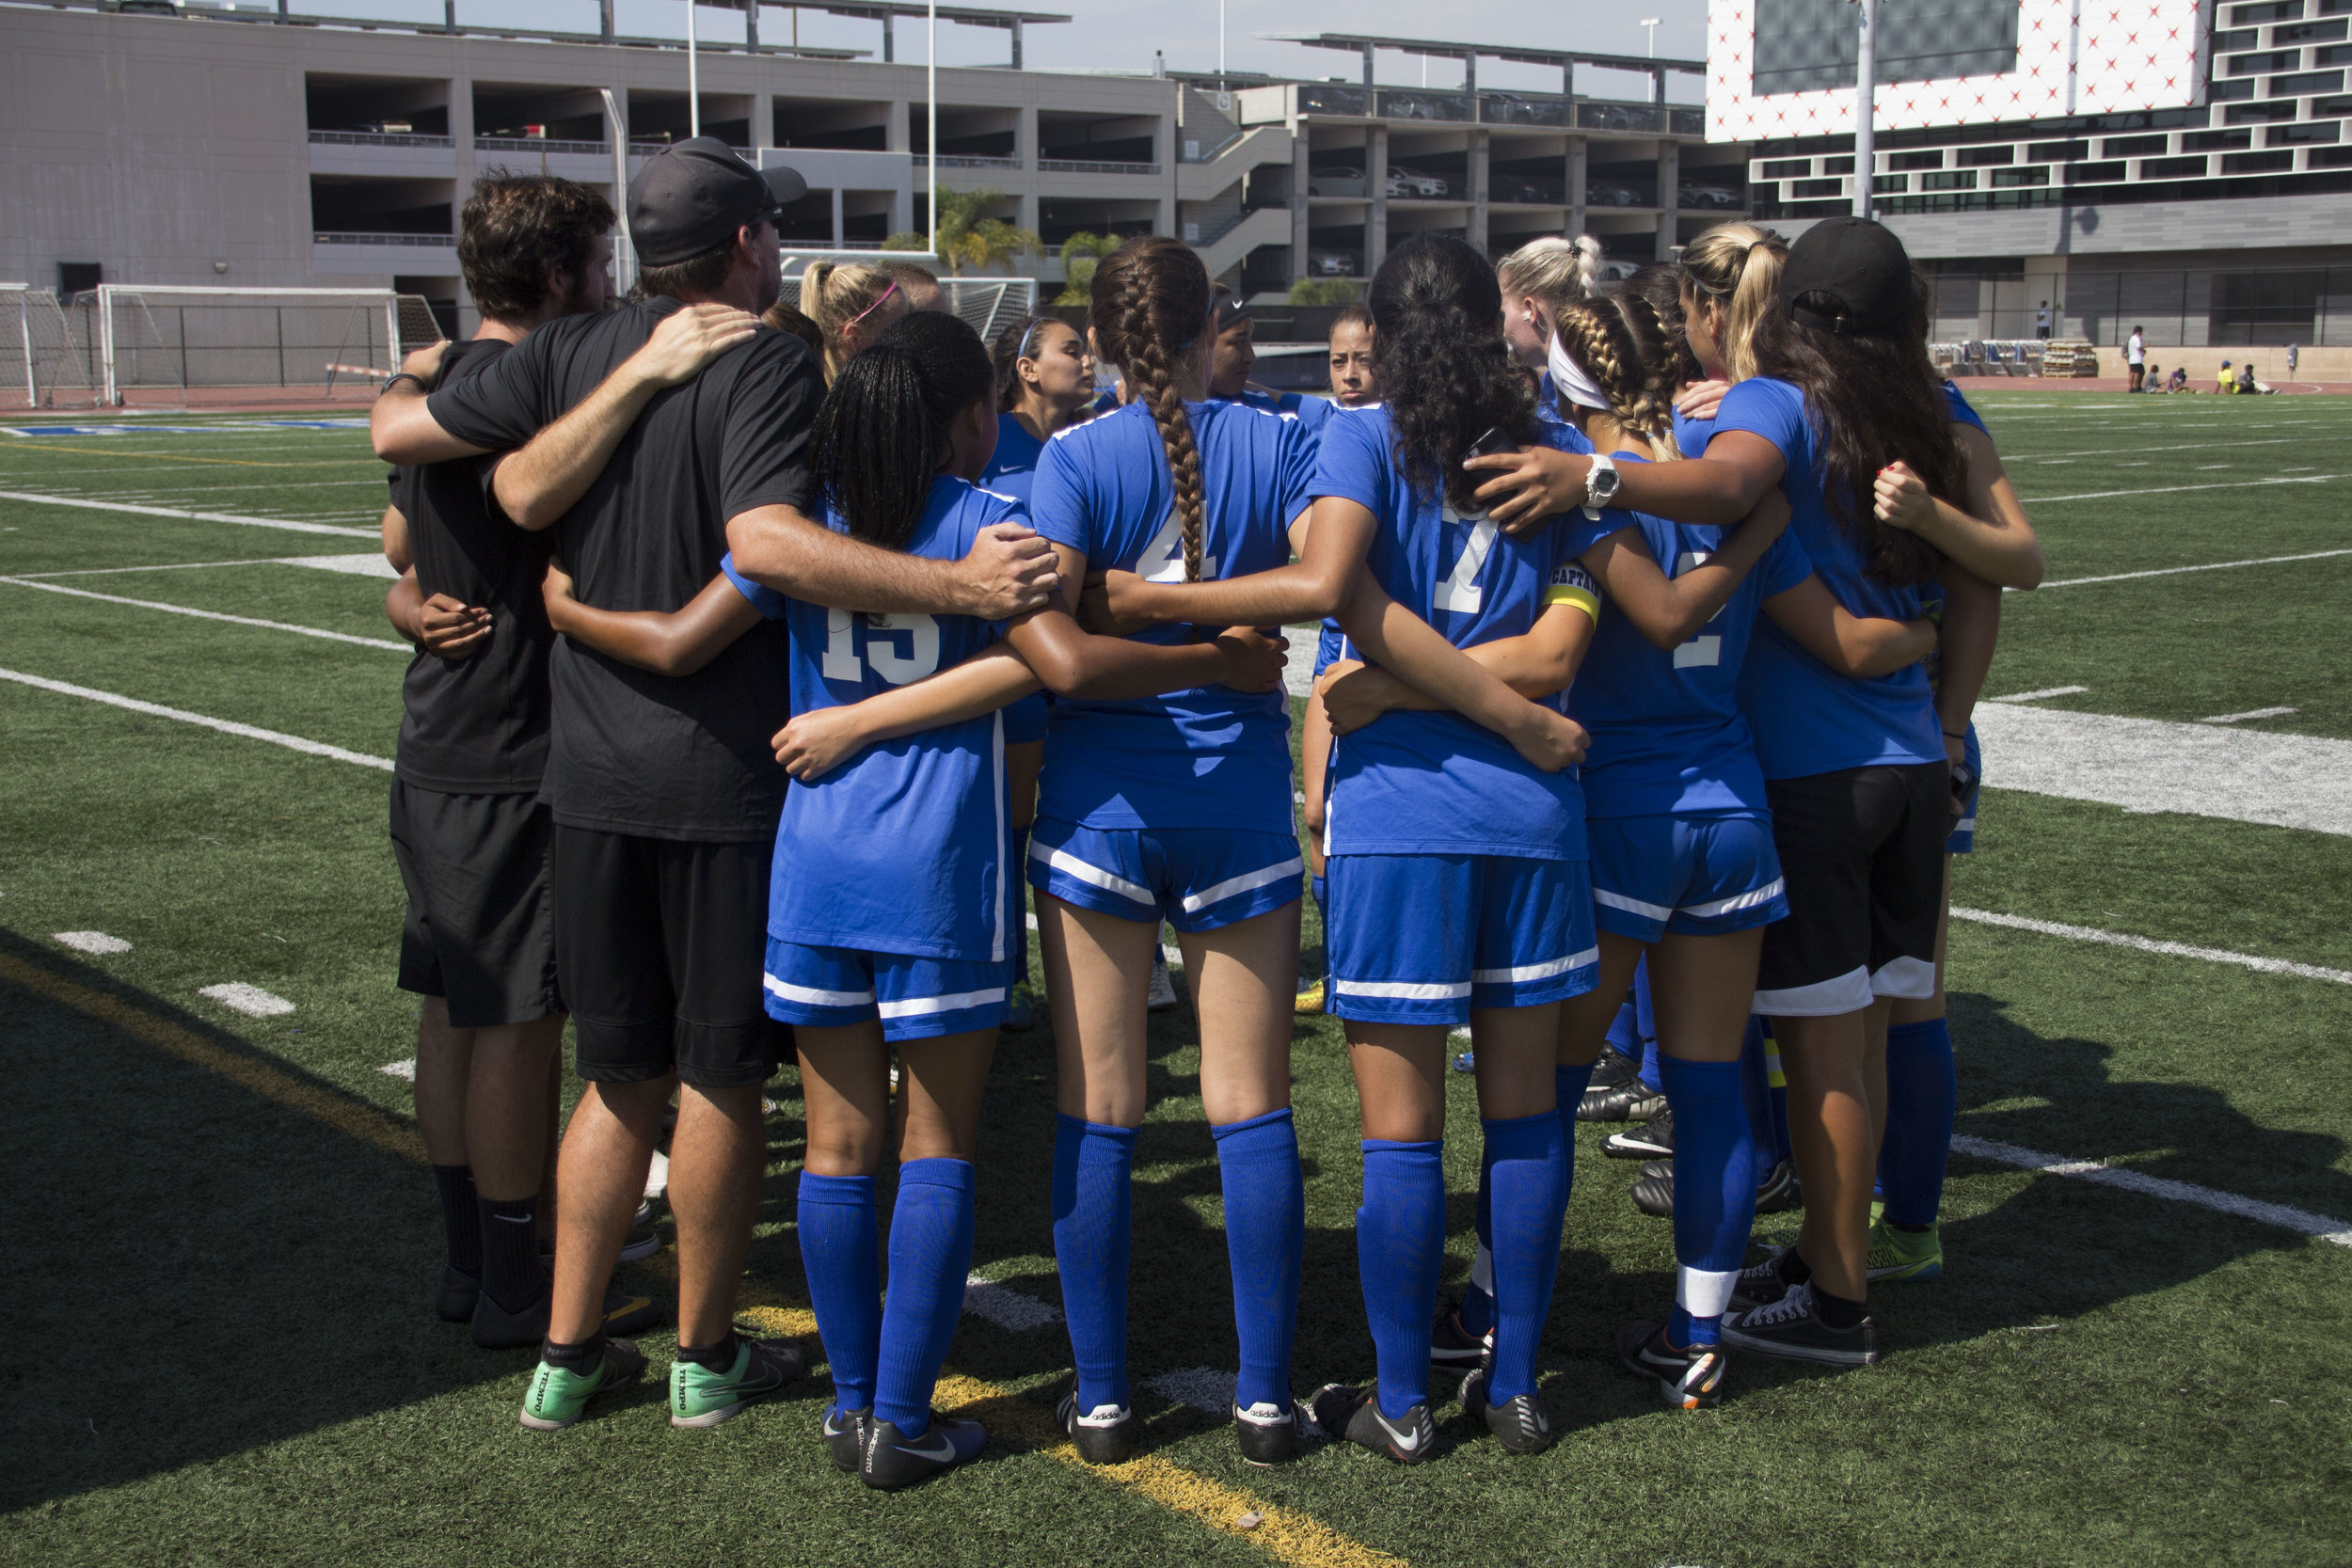  The Santa Monica Corsairs Women's soccer team huddling before their match against the Long Beach City Collge Vikings on Tuesday, August 29th, 2017 at the Santa Monica College Field at Santa Monica, California. They came out with a draw 1-1 after hav